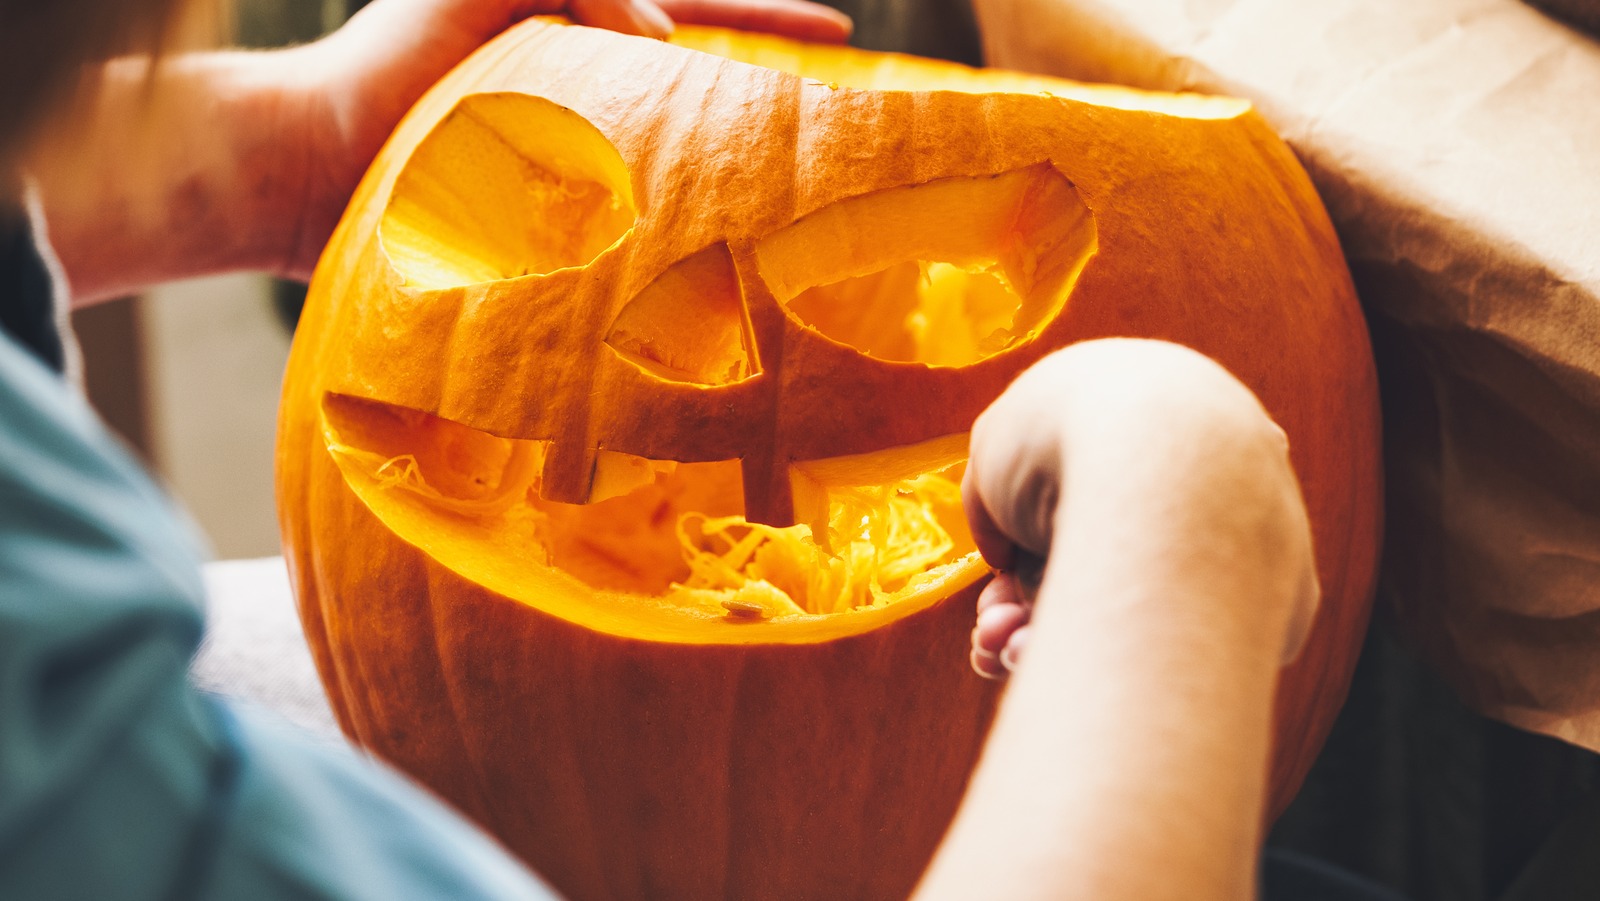 Are Carving Pumpkins Edible?